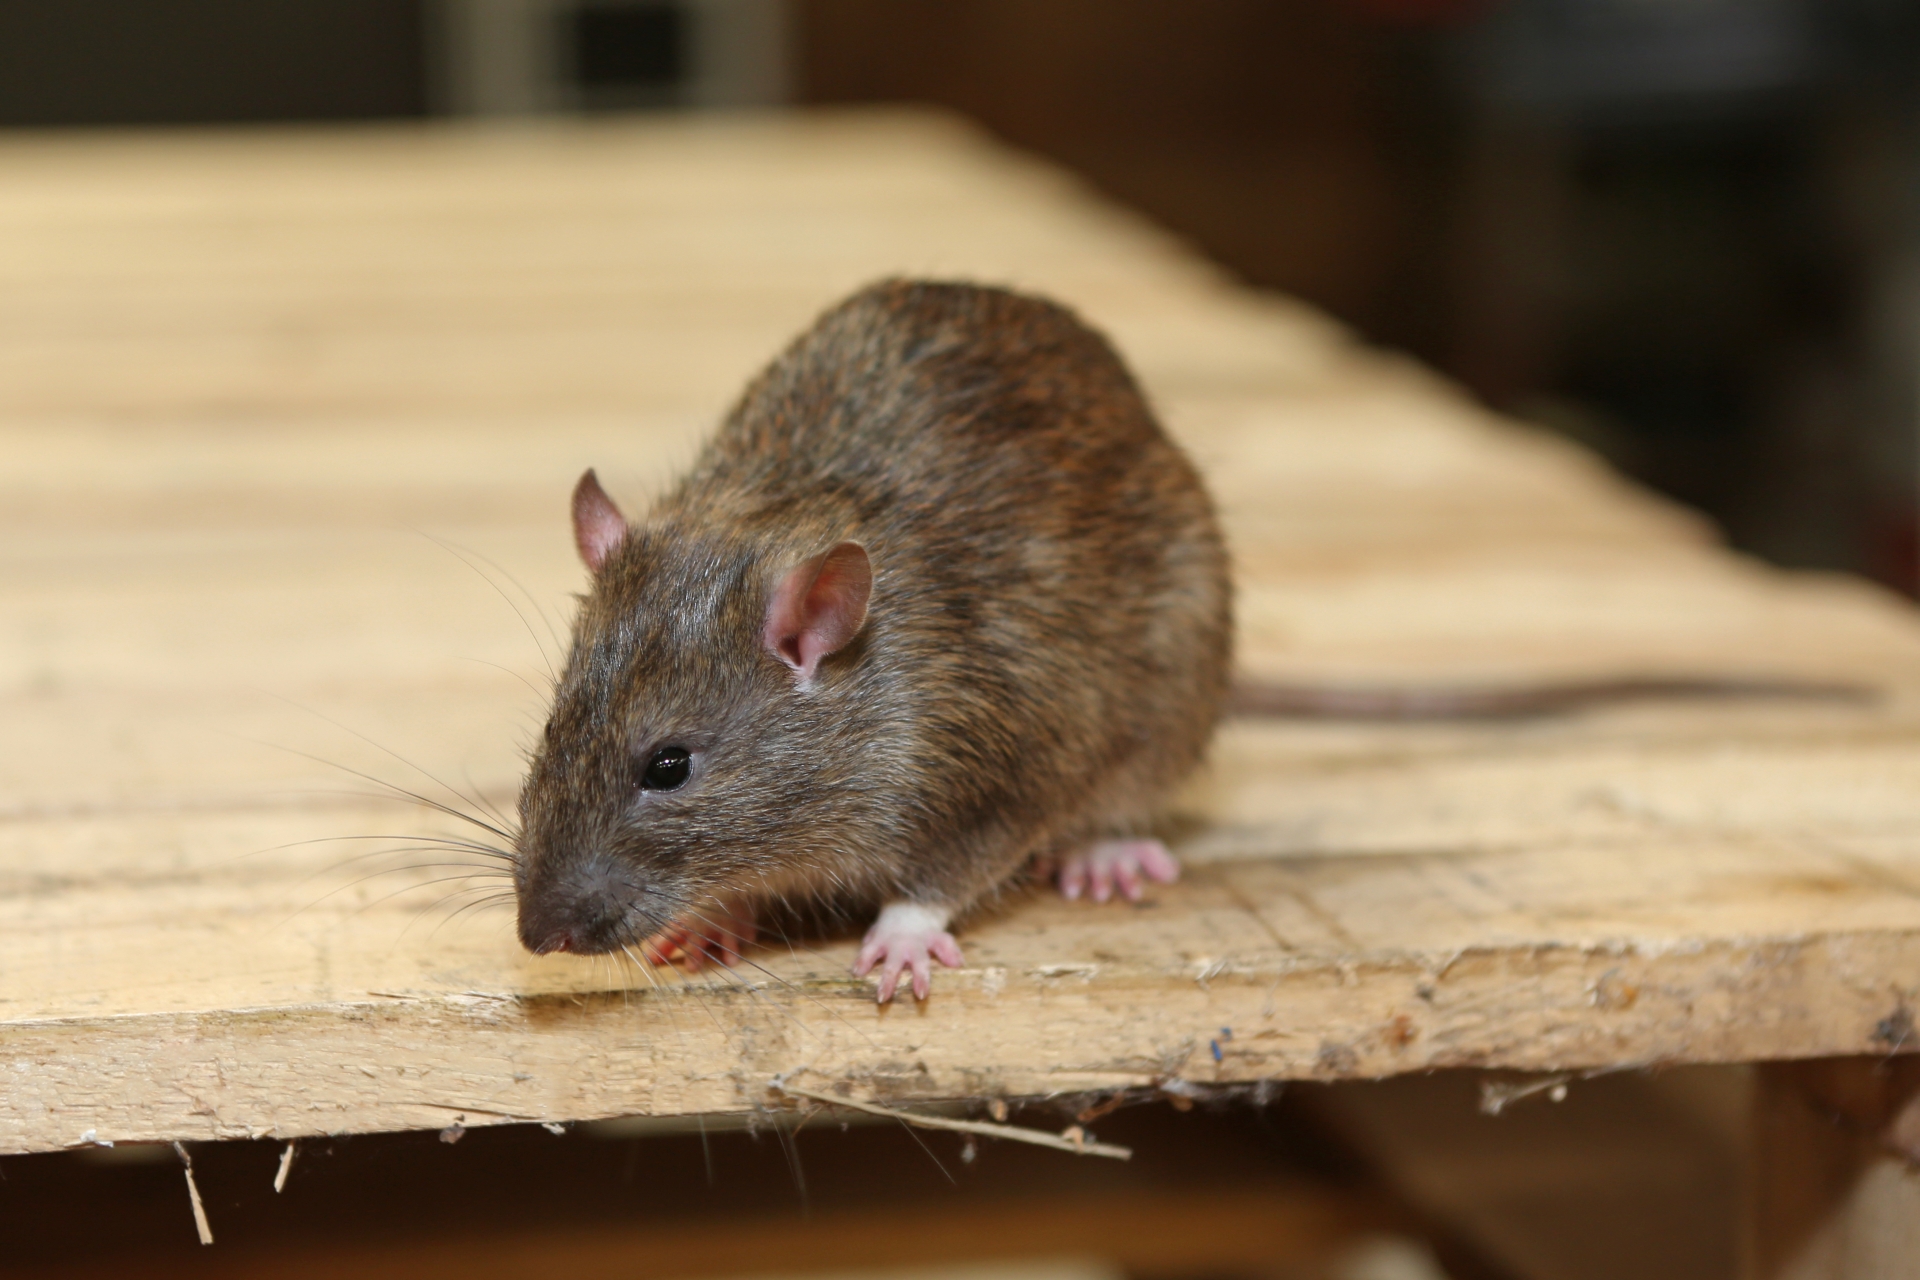 Rat extermination, Pest Control in Streatham Hill, SW2. Call Now 020 8166 9746